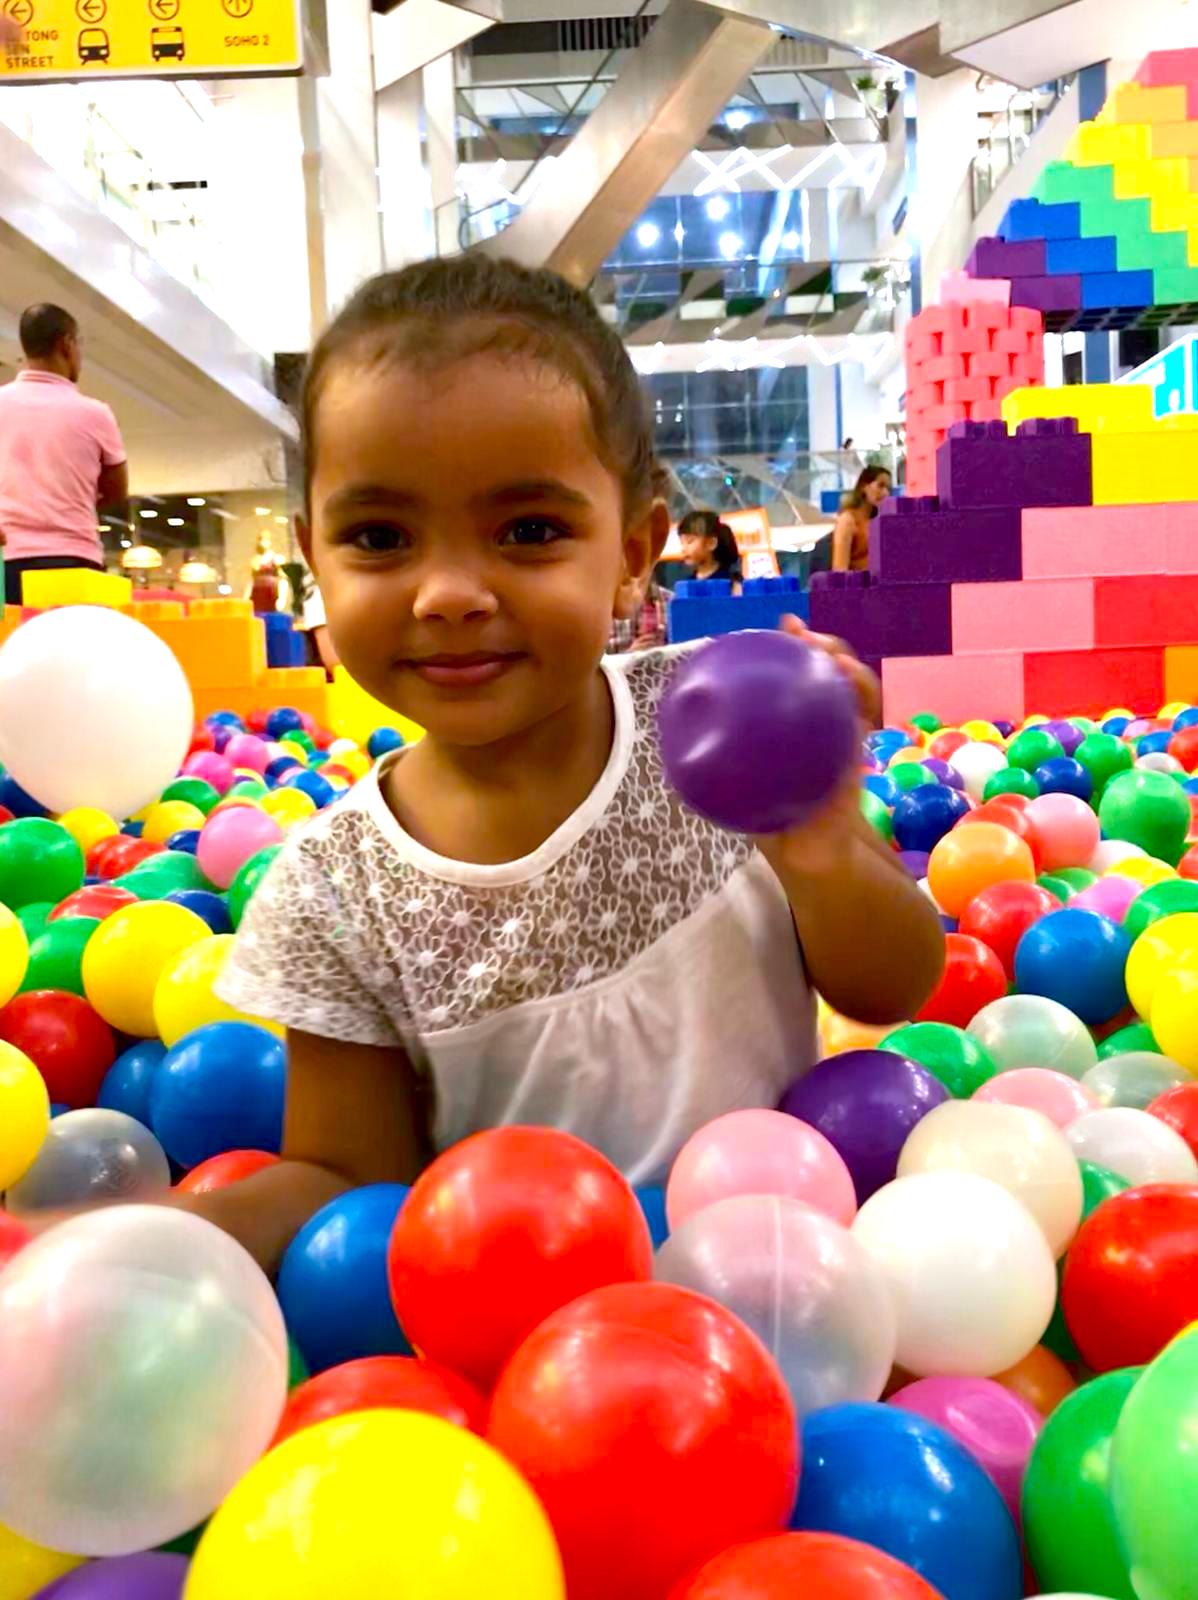 Ball pit in Shopping Mall